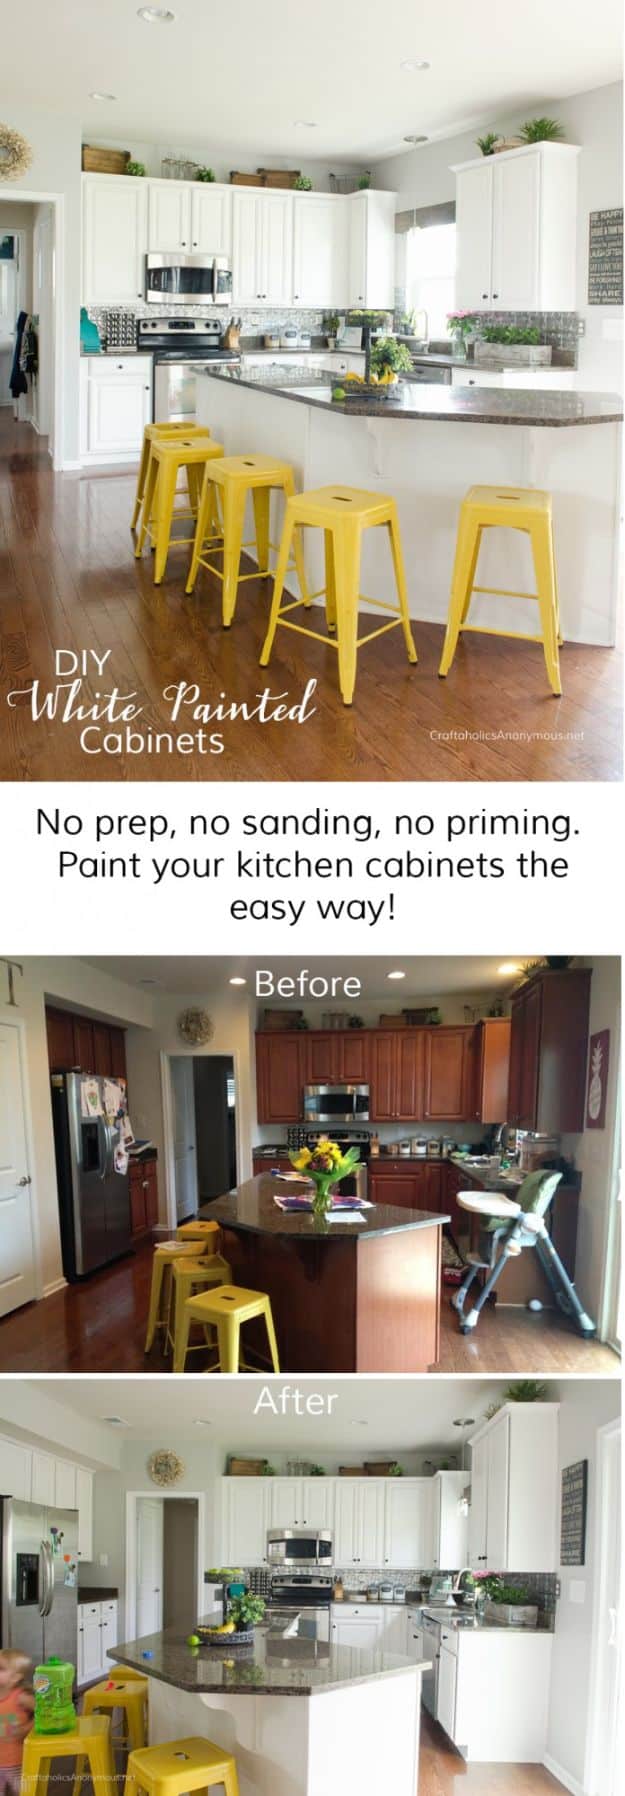 DIY Kitchen Cabinet Ideas - Paint Kitchen Cabinets with Chalk Paint - Makeover and Before and After - How To Build, Plan and Renovate Your Kitchen Cabinets - Painted, Cheap Refact, Free Plans, Rustic Decor, Farmhouse and Vintage Looks, Modern Design and Inexpensive Budget Friendly Projects 